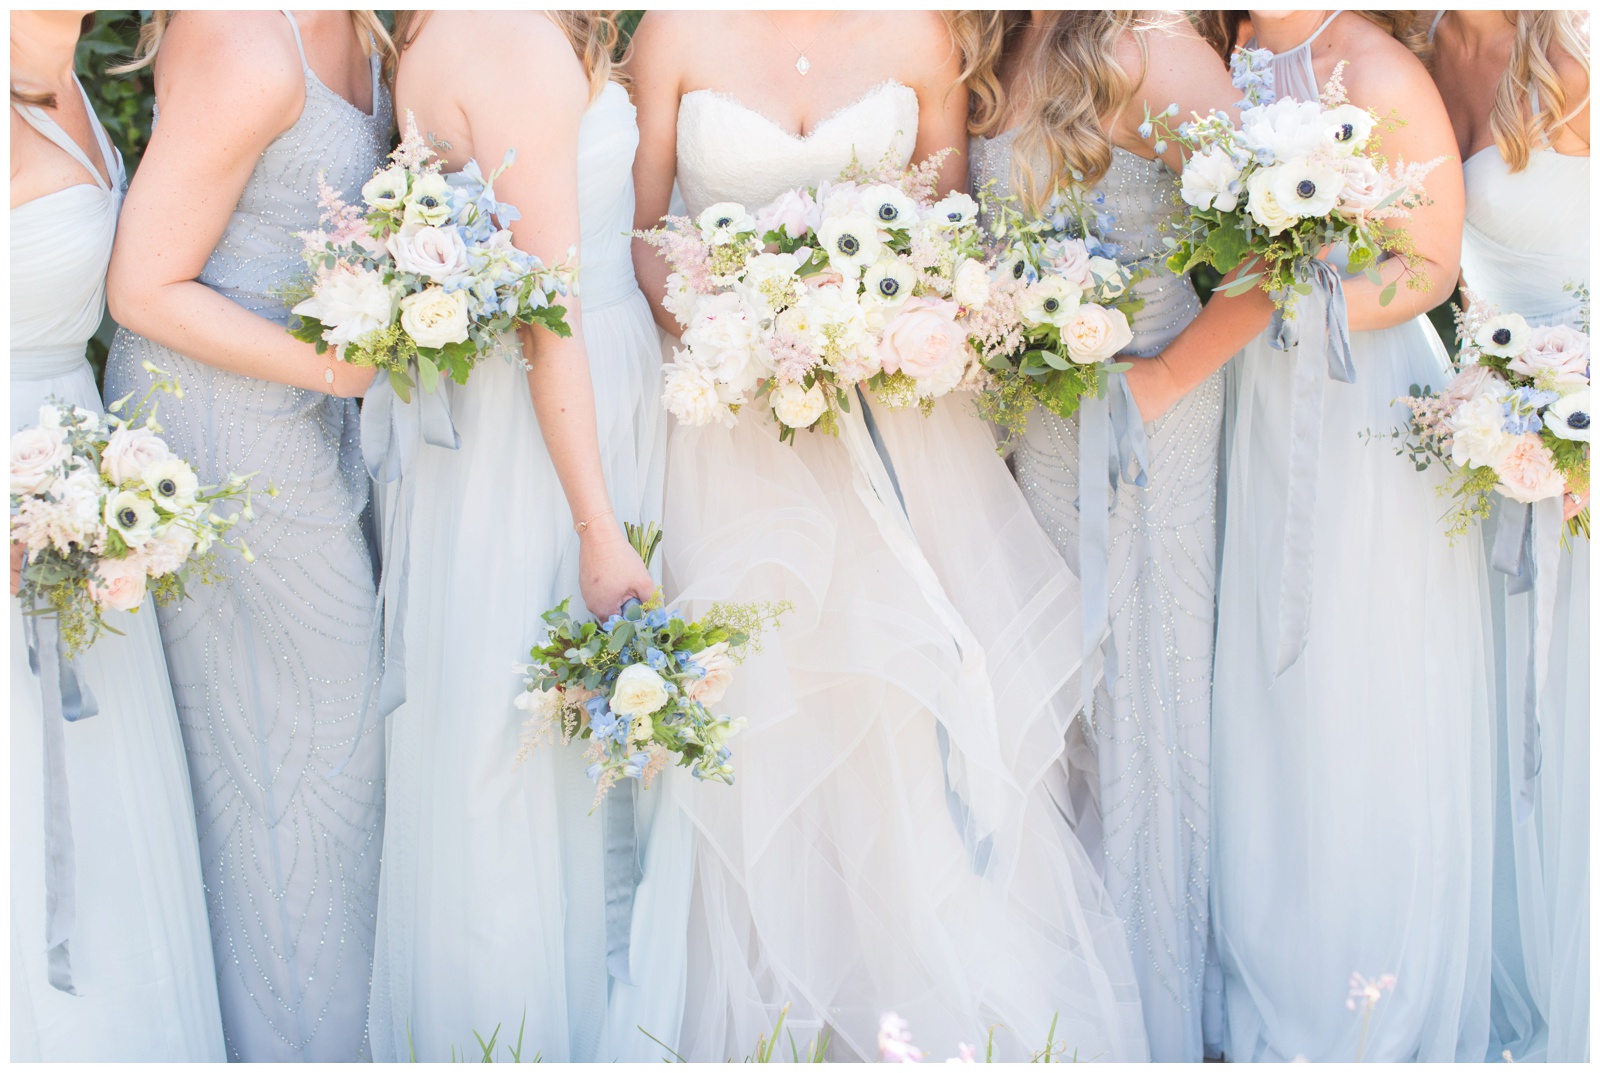 Blue Bridesmaids dresses with pink, white and blue bouquets